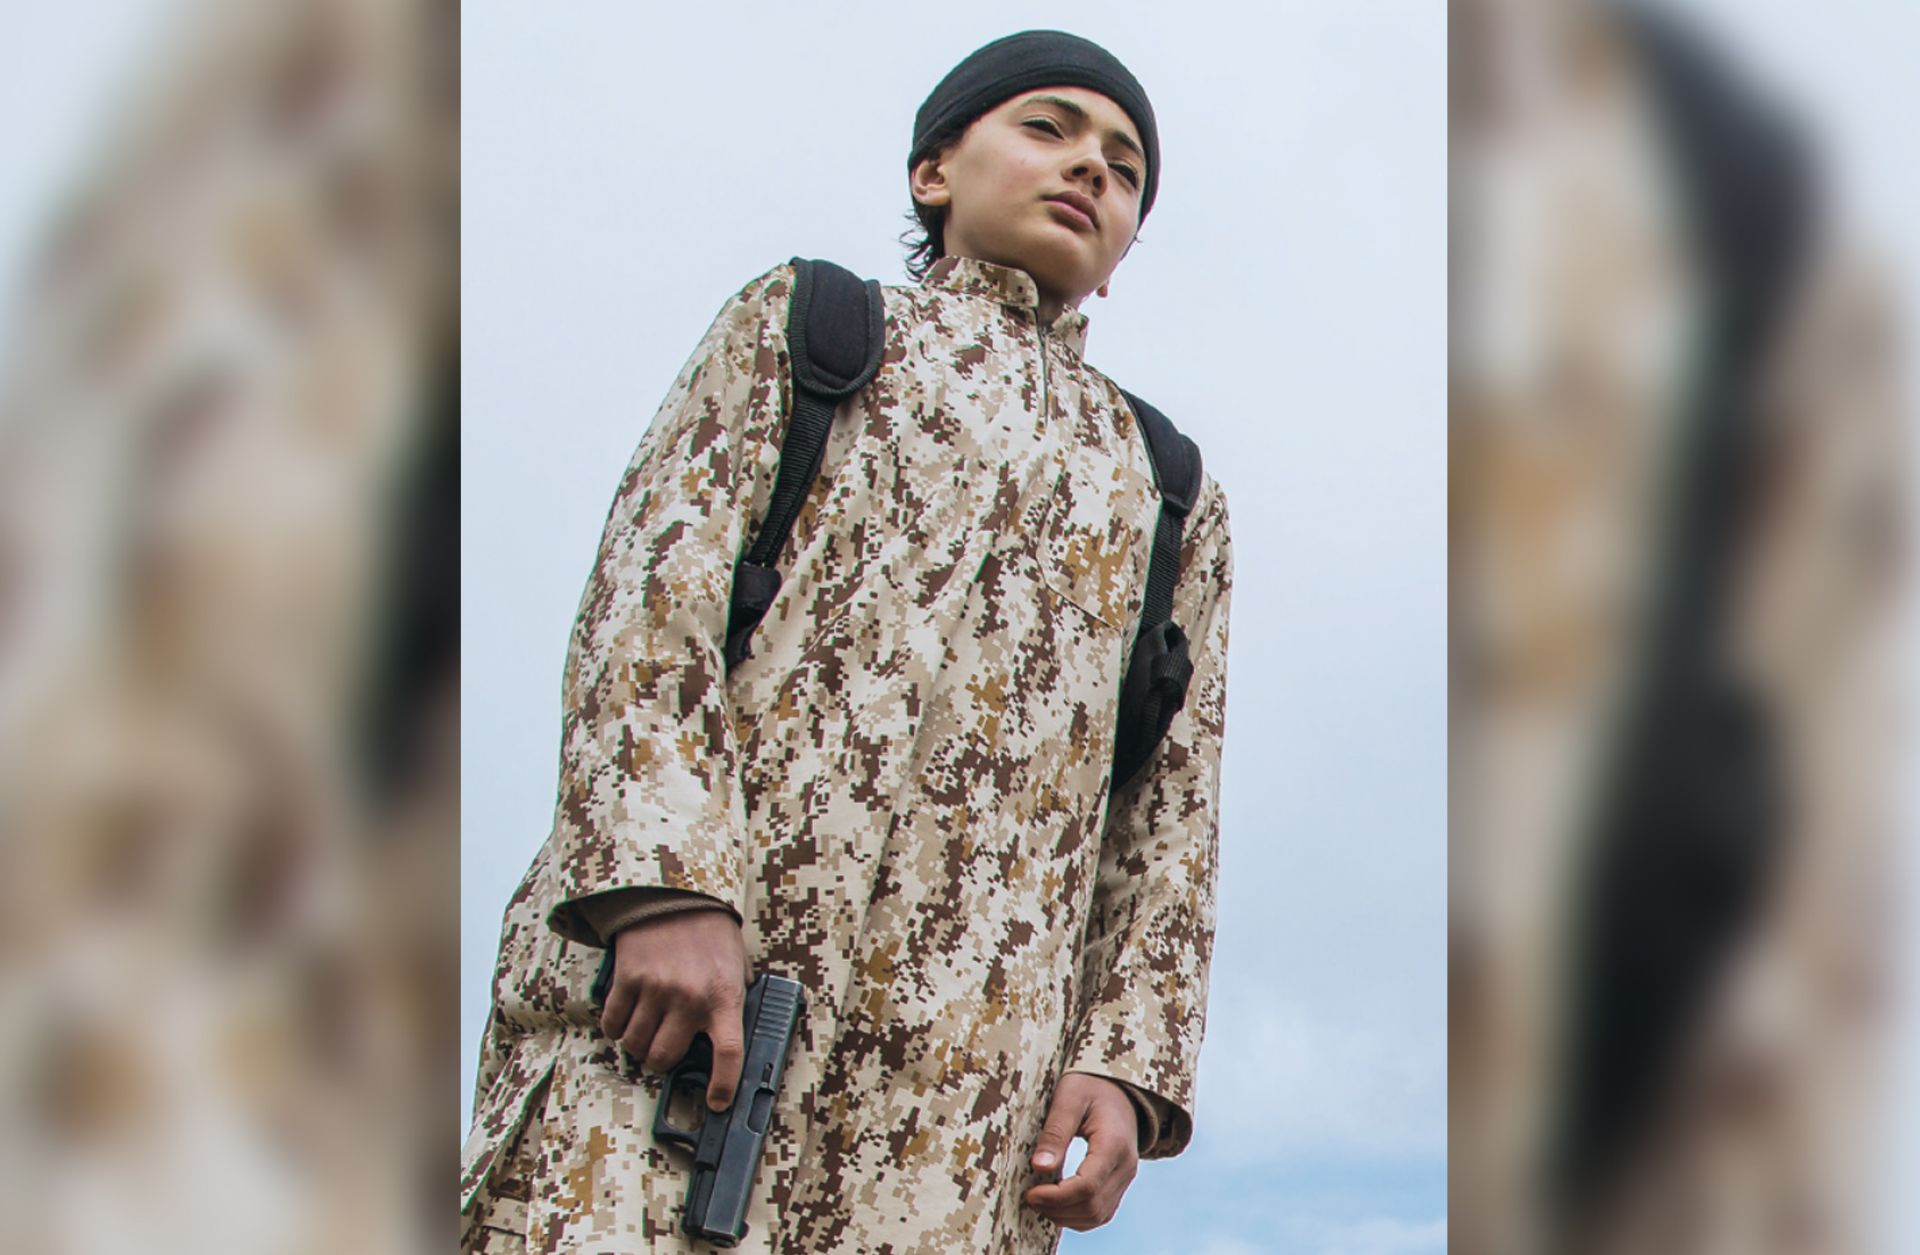 Islamic State propaganda such as Dabiq magazine often features images of children who have been radicalized by the group.